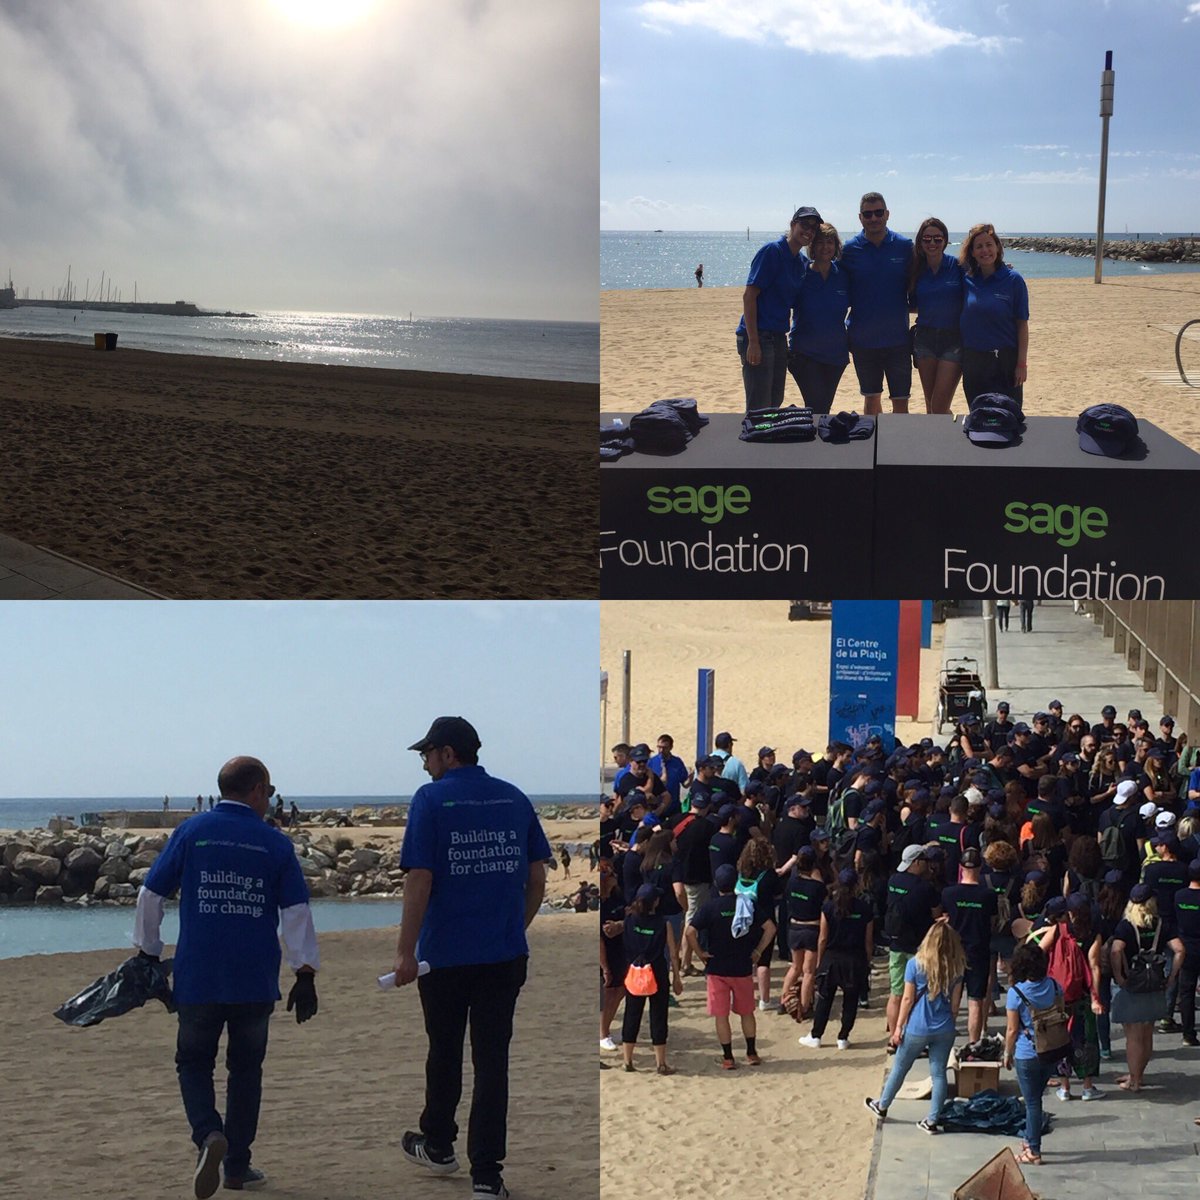 Anyone else get to spend Friday like this? 200 @SageSpain colleagues and @sagepartners #volunteering for #WorldOceansDay with @sagefoundation #WOD #marinelitter #basuramarina #barcelona #doitforyou ☀️🦀🏖